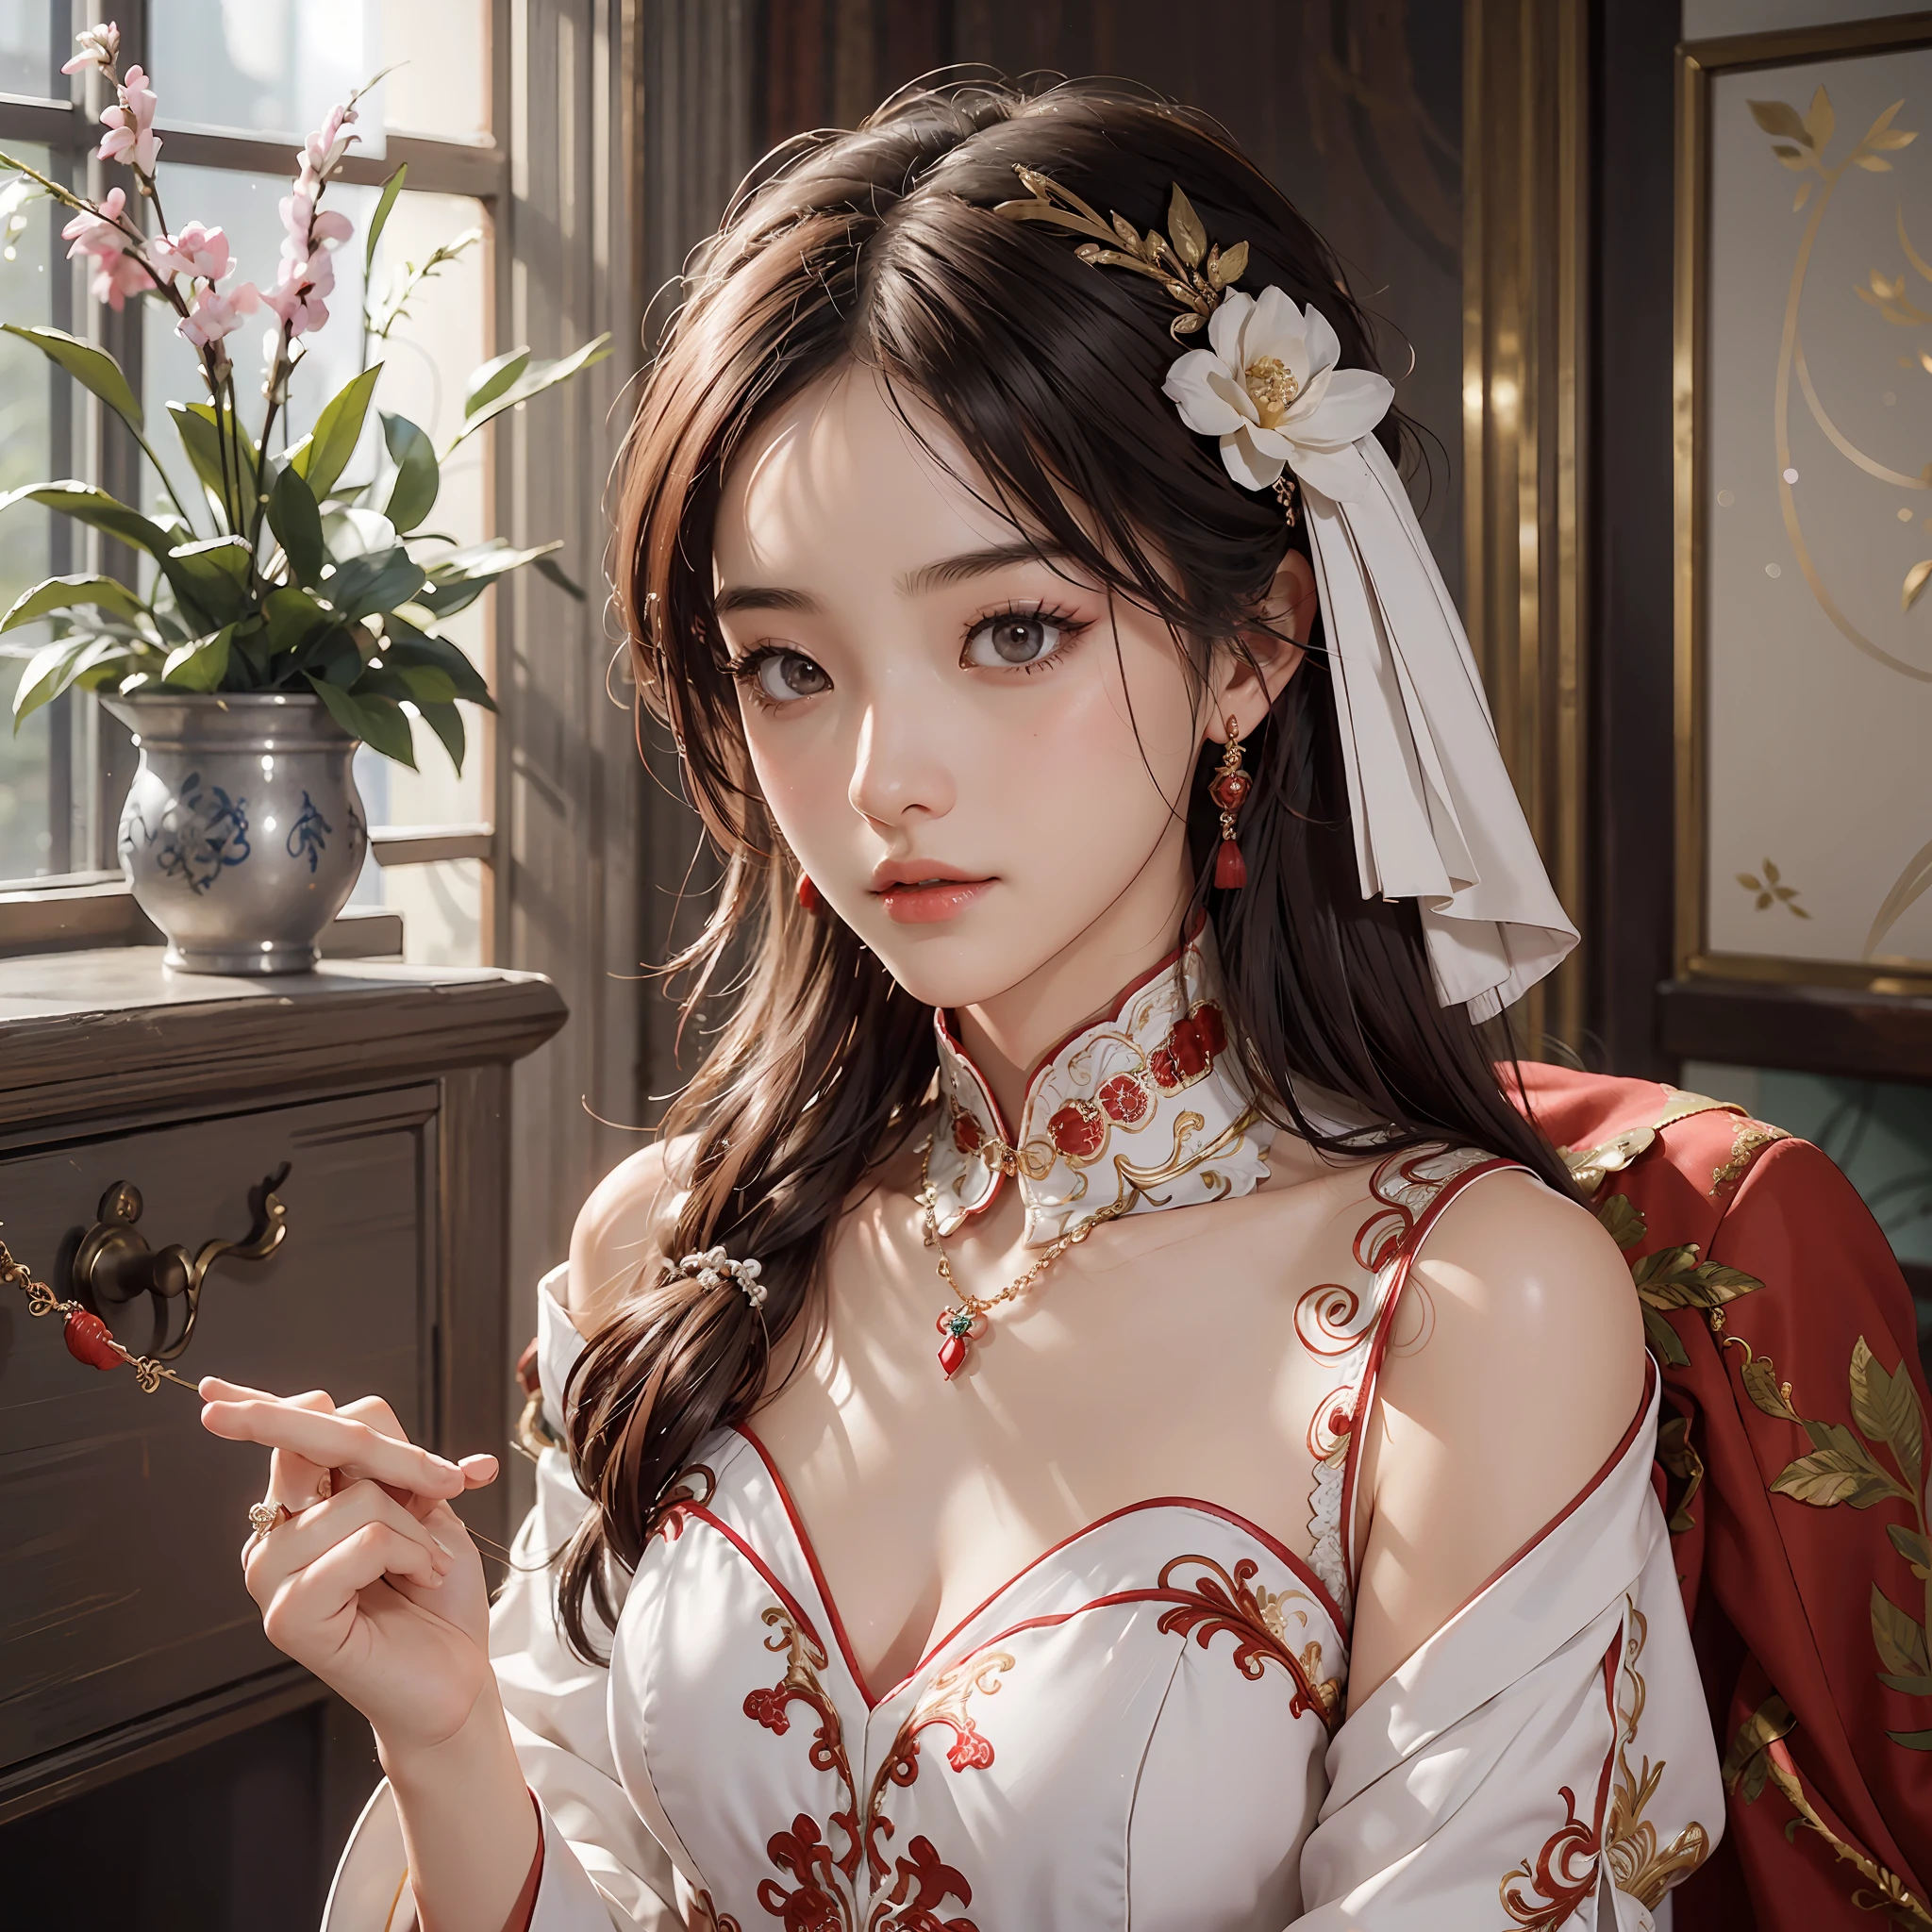 (a Chinese bride, wearing a gorgeous Chinese wedding dress), (shy, tender, beautiful face, fair skin, bright eyes, elegant eyebrows, happiness and expectation, rosy lip color, soft face), (red clothing: 1.4), (wearing exquisite jewelry, rings, necklaces)), (exquisite materials, embroidery, beads, lace, slim tailoring, lace decoration), purity, romance, (body curves), pleated decoration, (cinematic quality), (Best quality: 1.2), (Realism: 1.4), (Indoor), Photoquality, ((Octane rendering)), close-up, photographic lighting